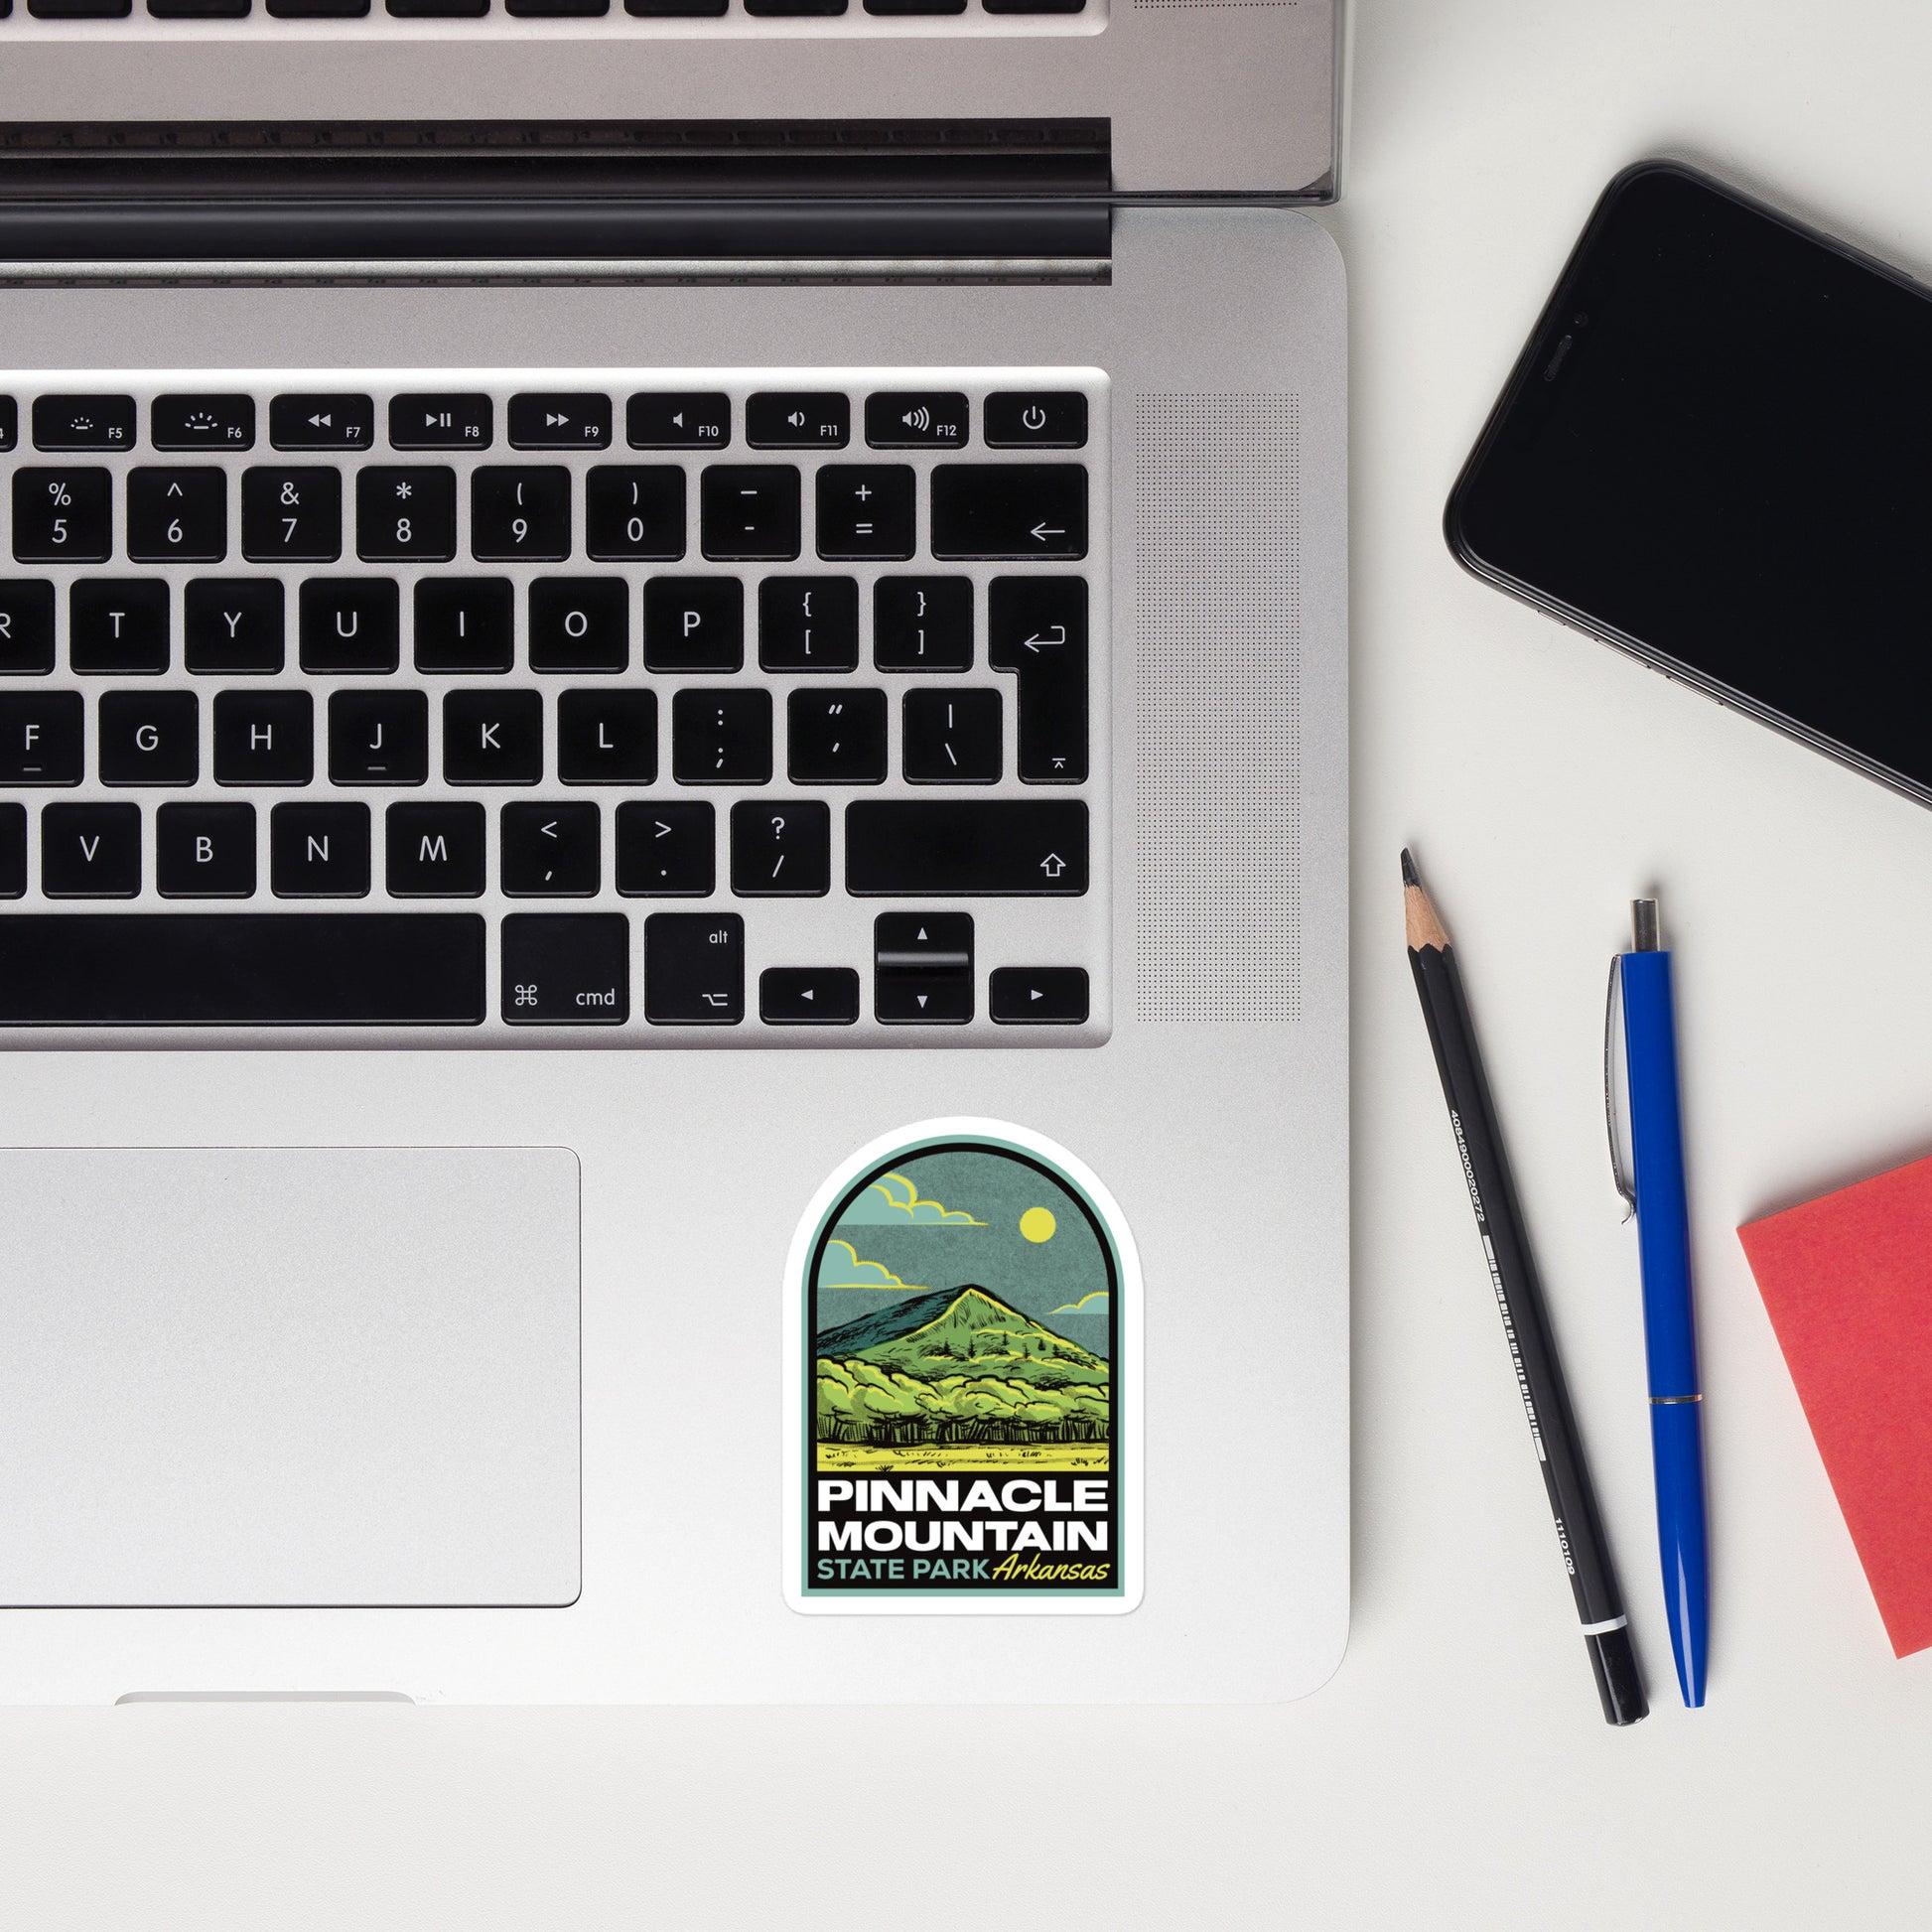 A sticker of Pinnacle Mountain State Park on a laptop